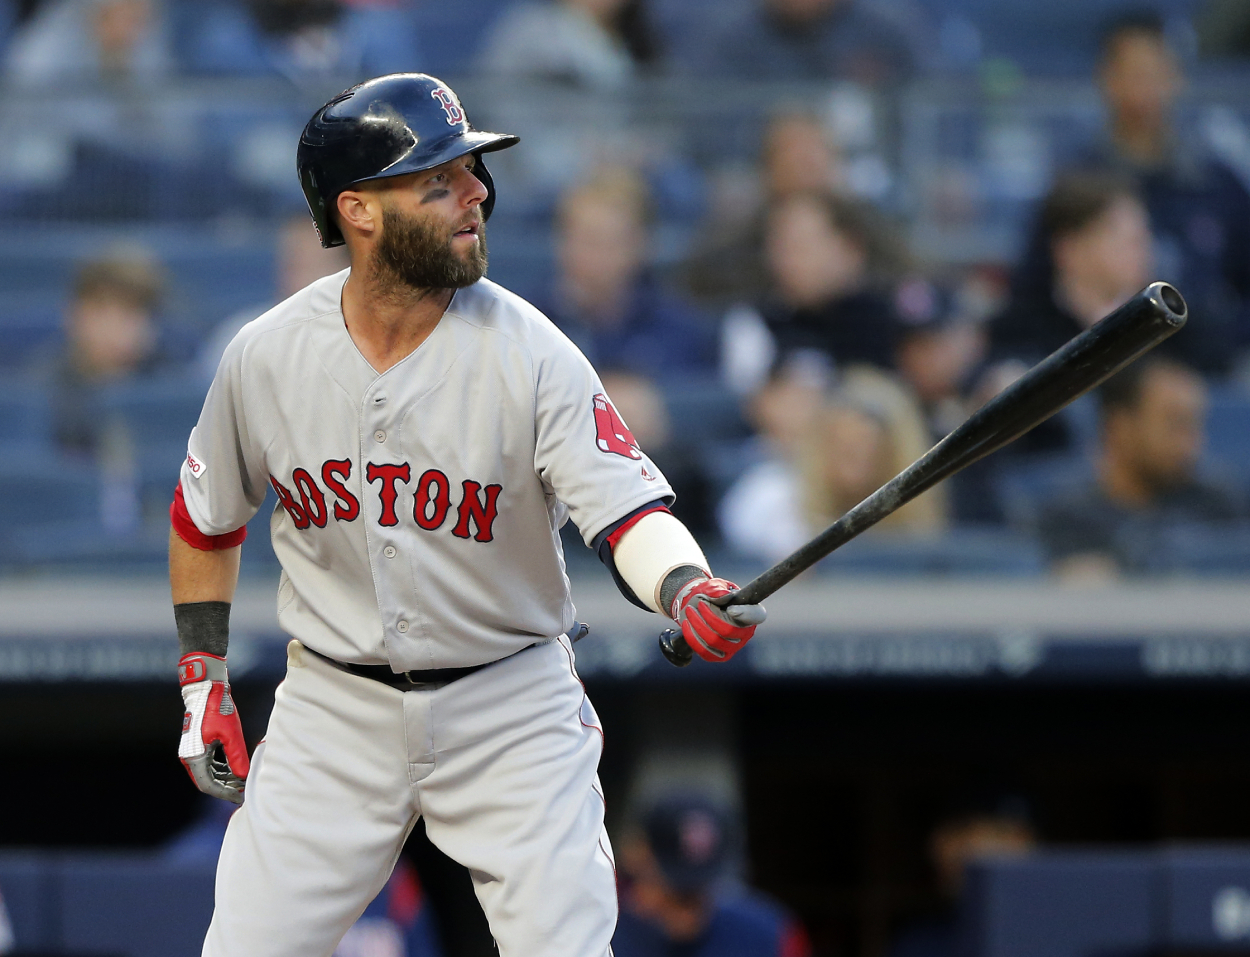 Dustin Pedroia was more than just a player for the Boston Red Sox.